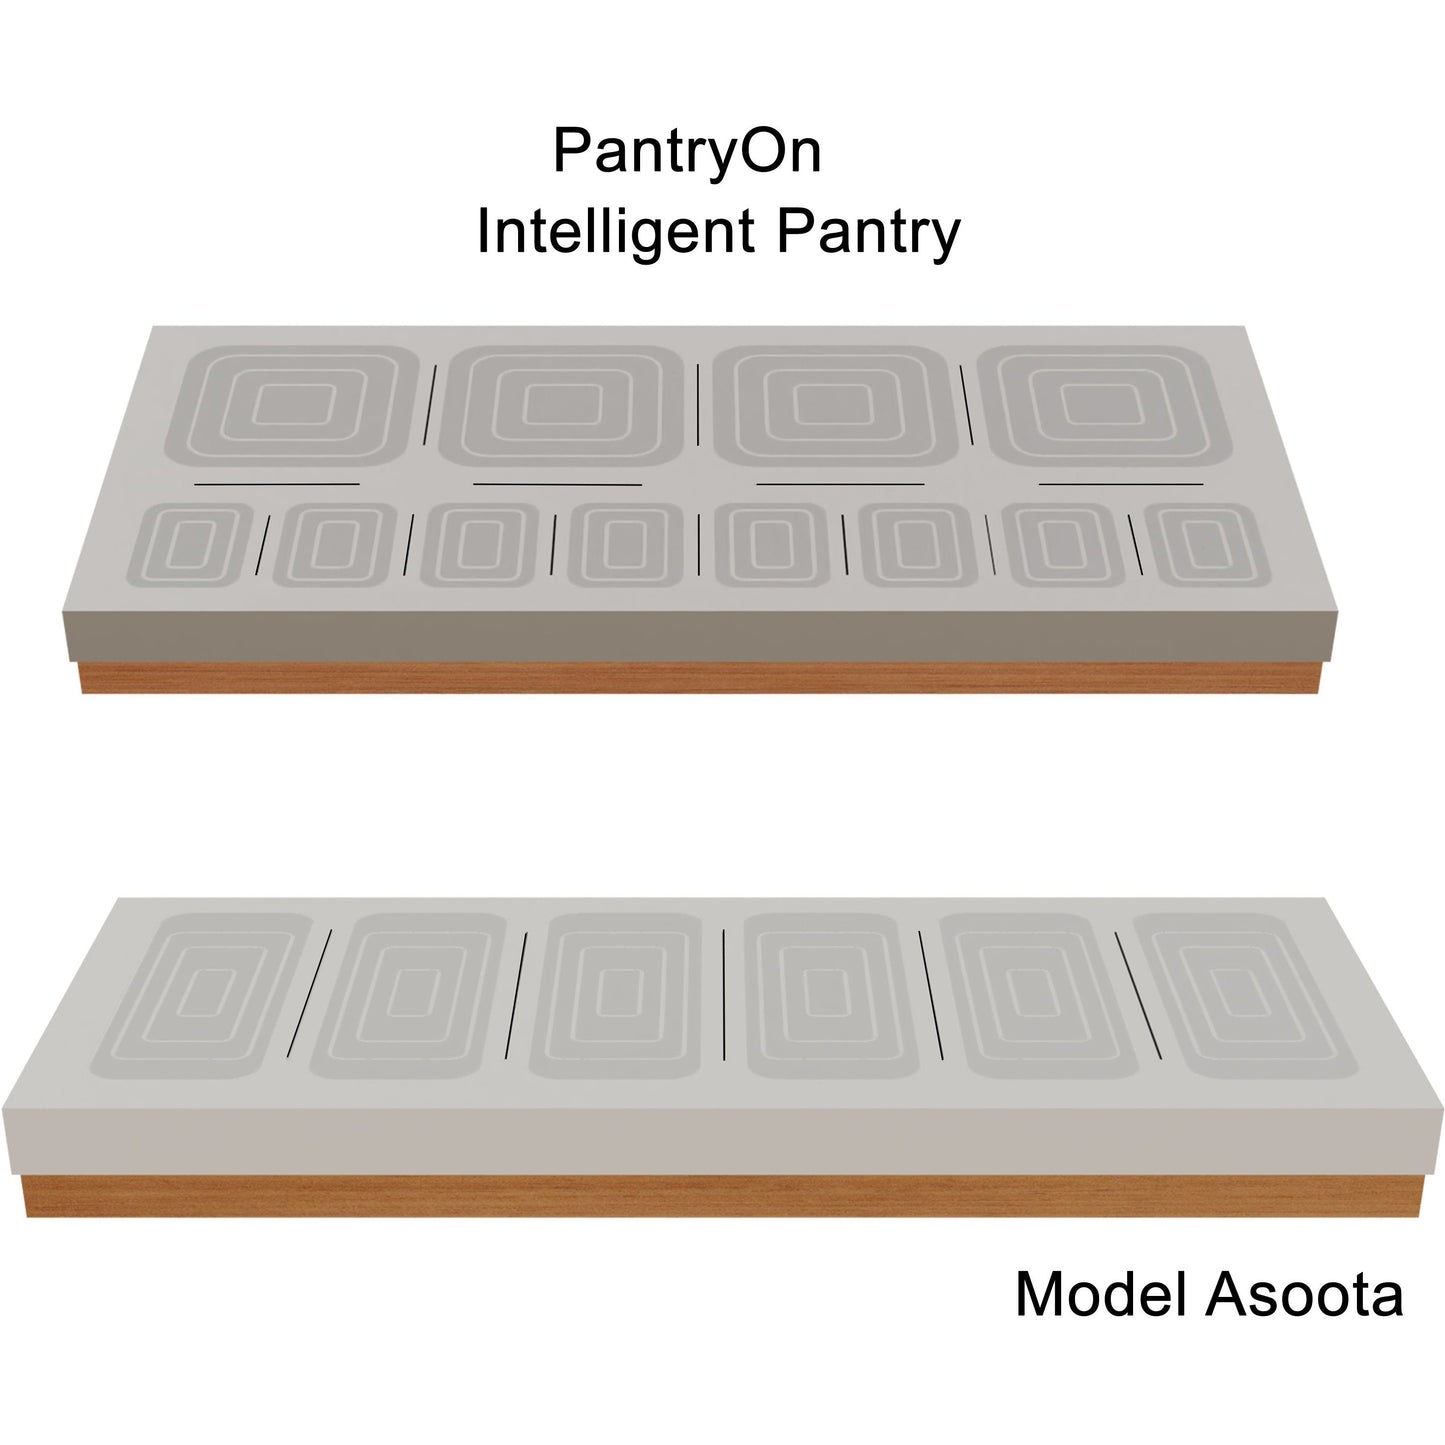 Intelligent Pantry Appliance. Asoota Suite. 18 Items managed